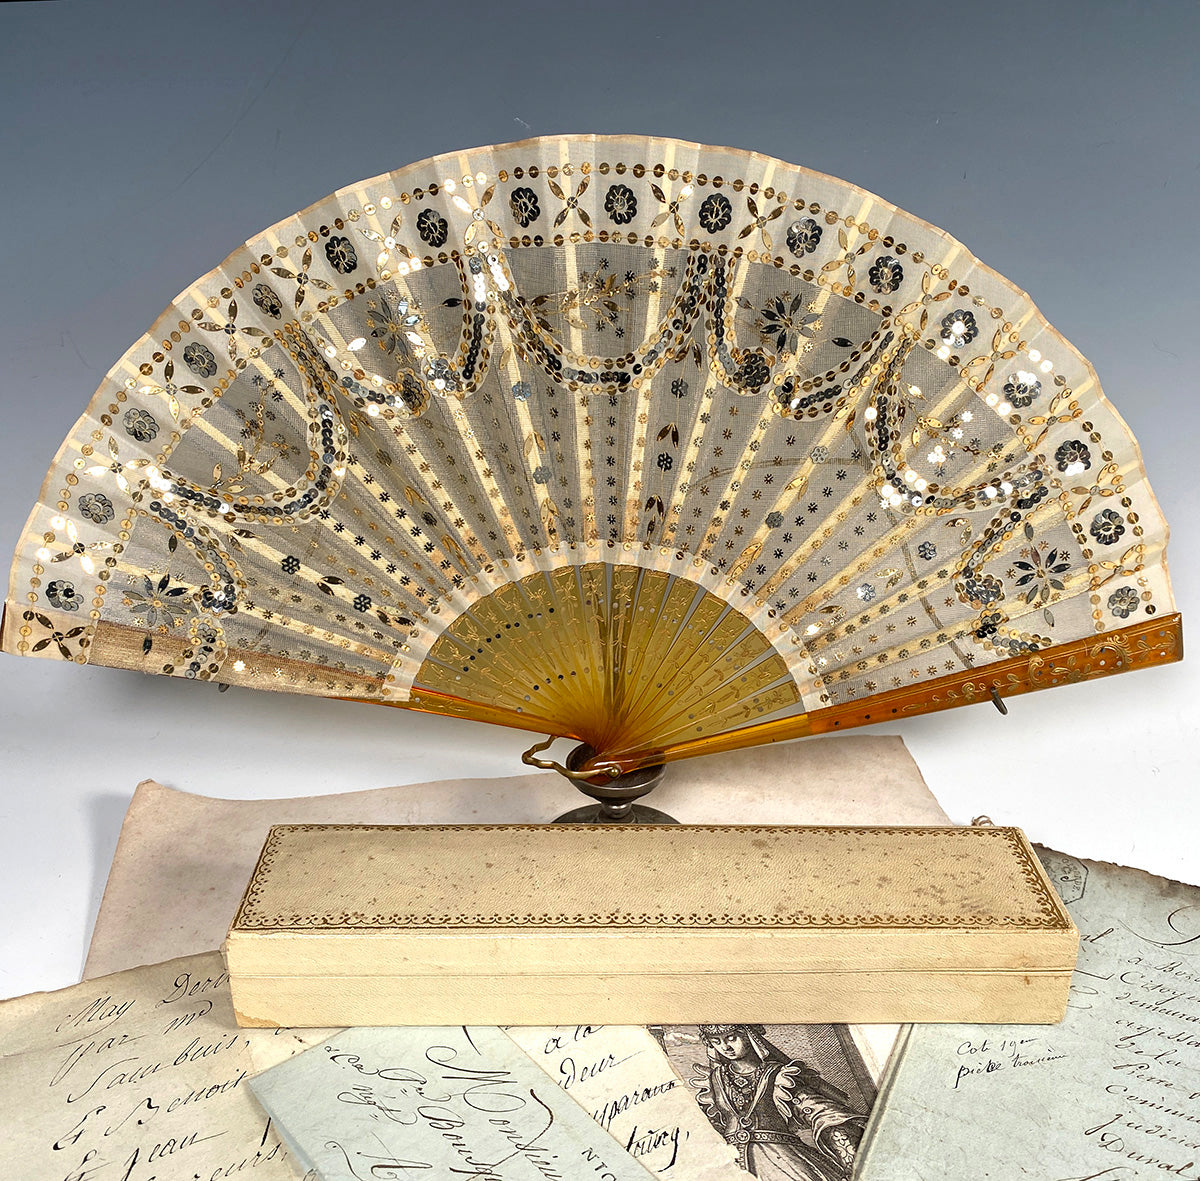 Fine Antique c.1900 French Hand Fan, Tulle Embroidered with Sequins, Blond Horn, in Original Box - Gallard